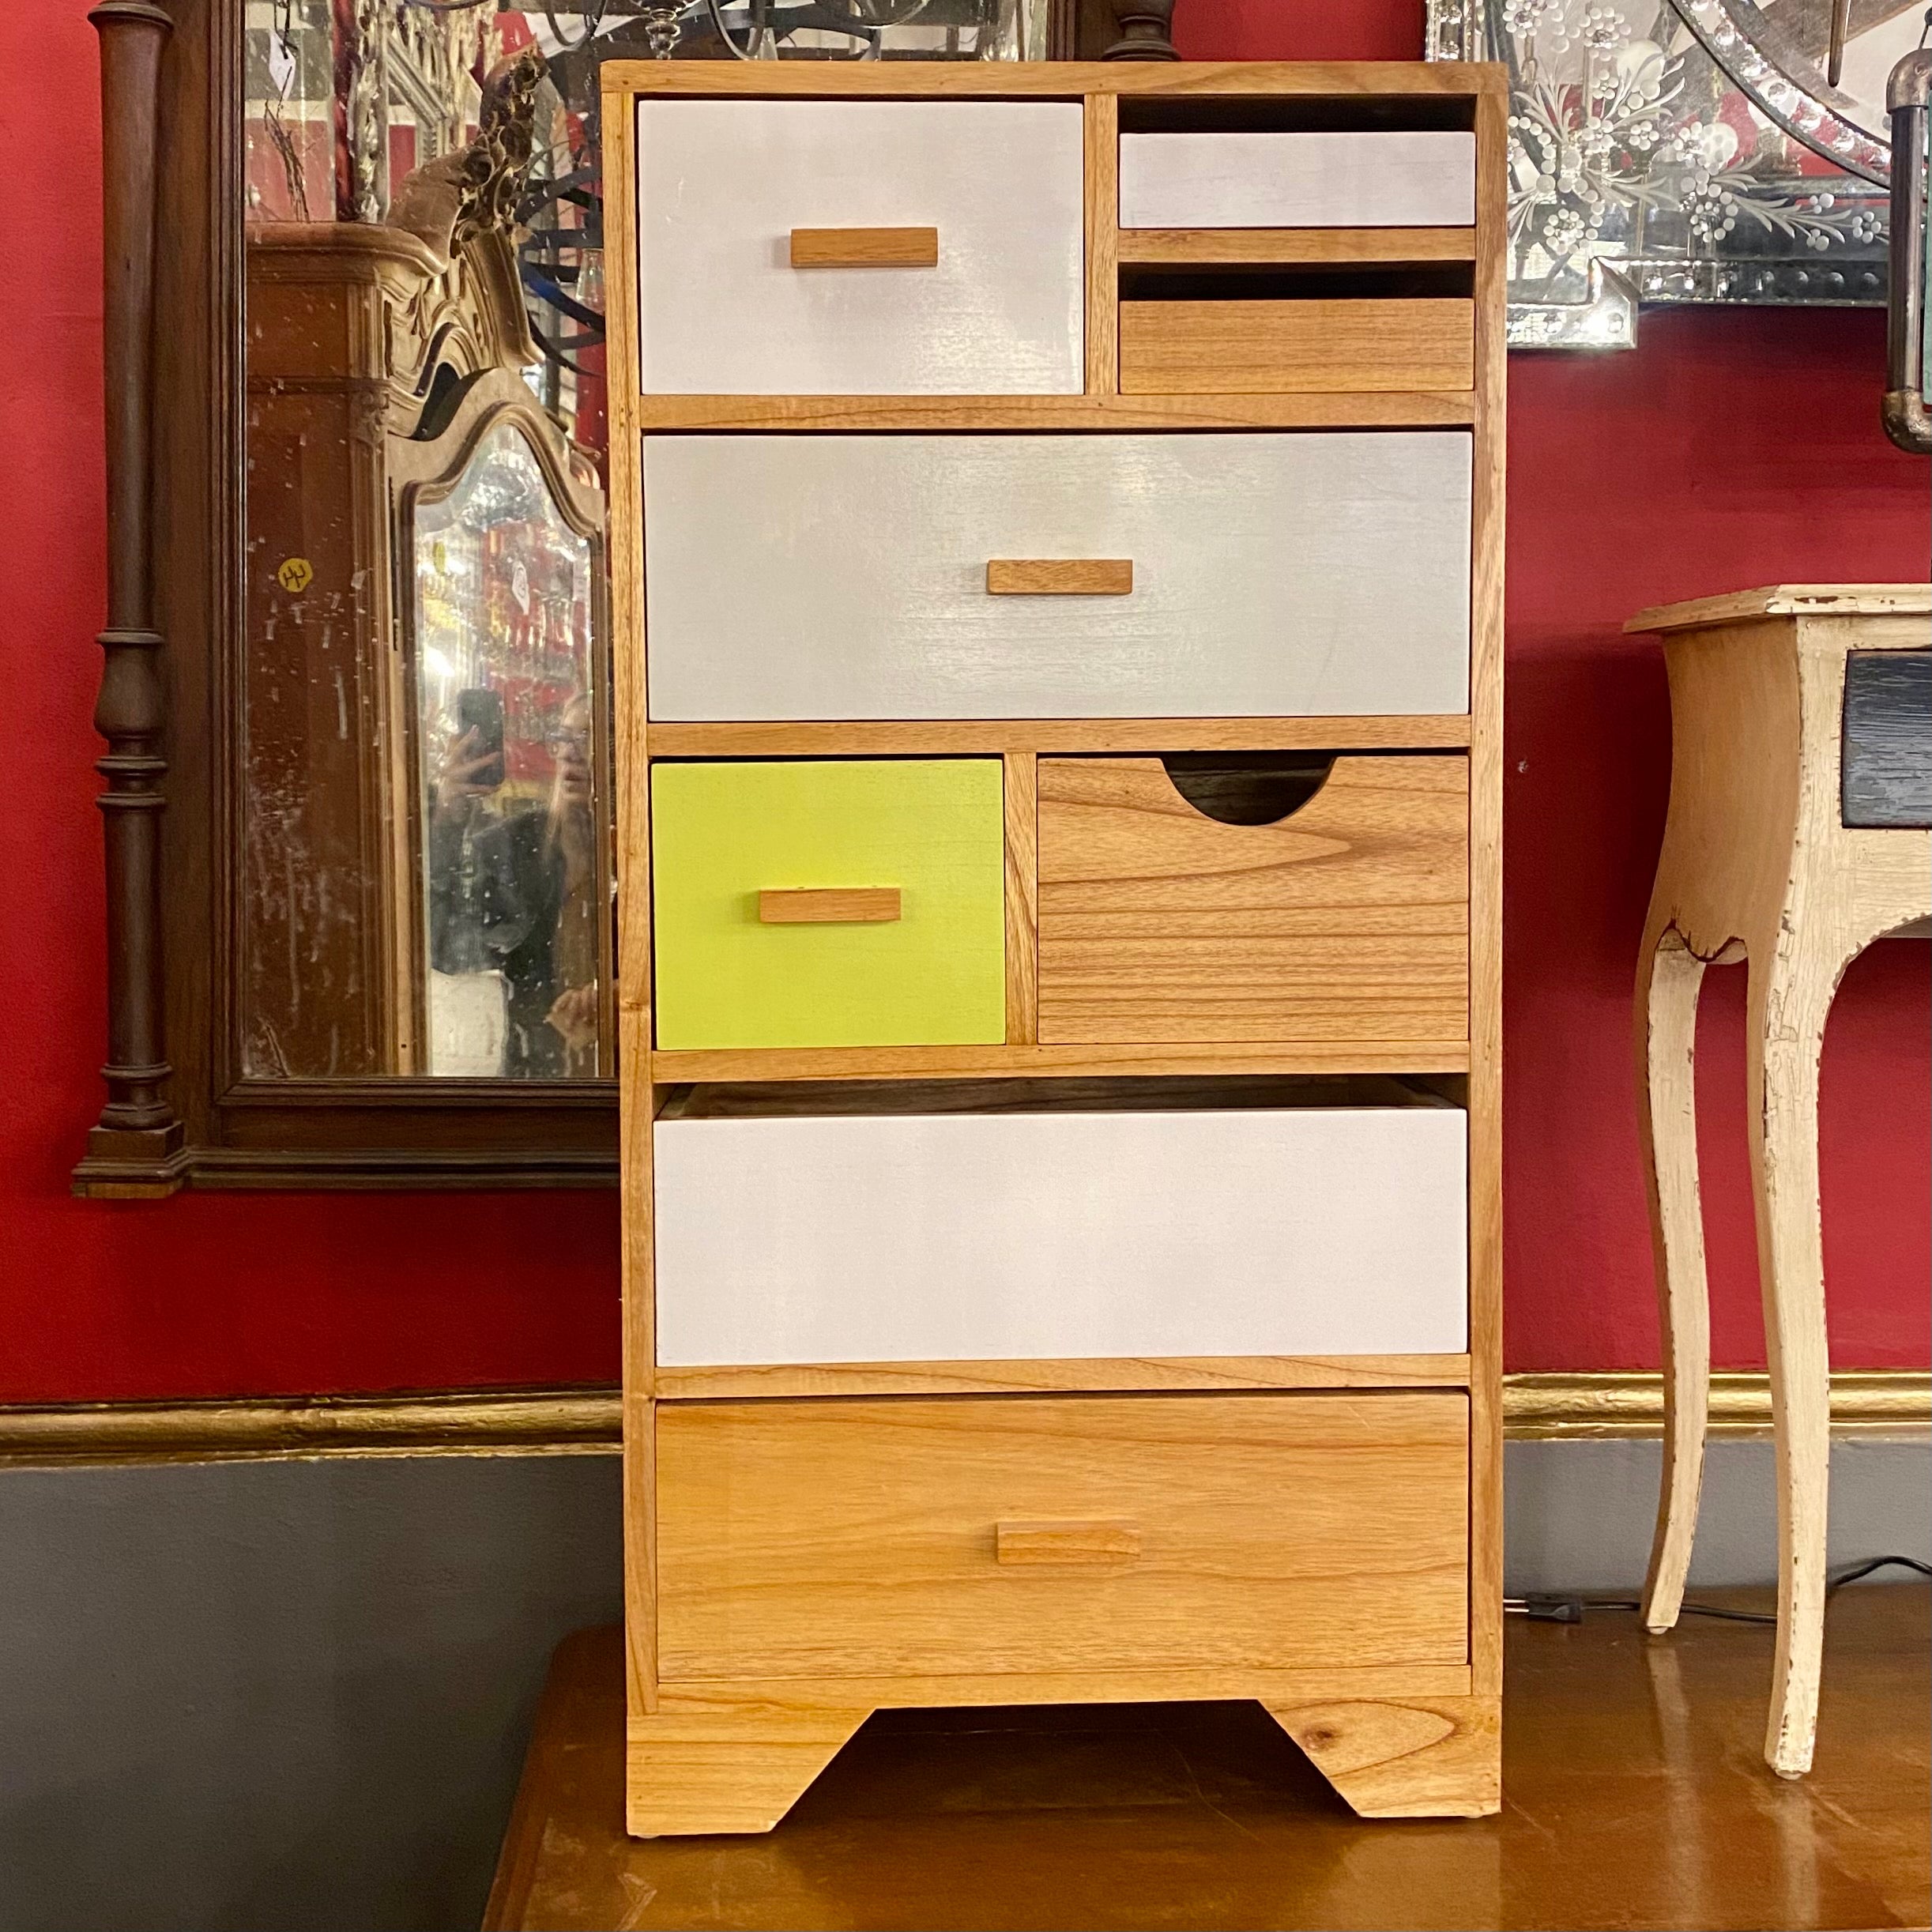 White & Yellow Retro Style Chest of Drawers